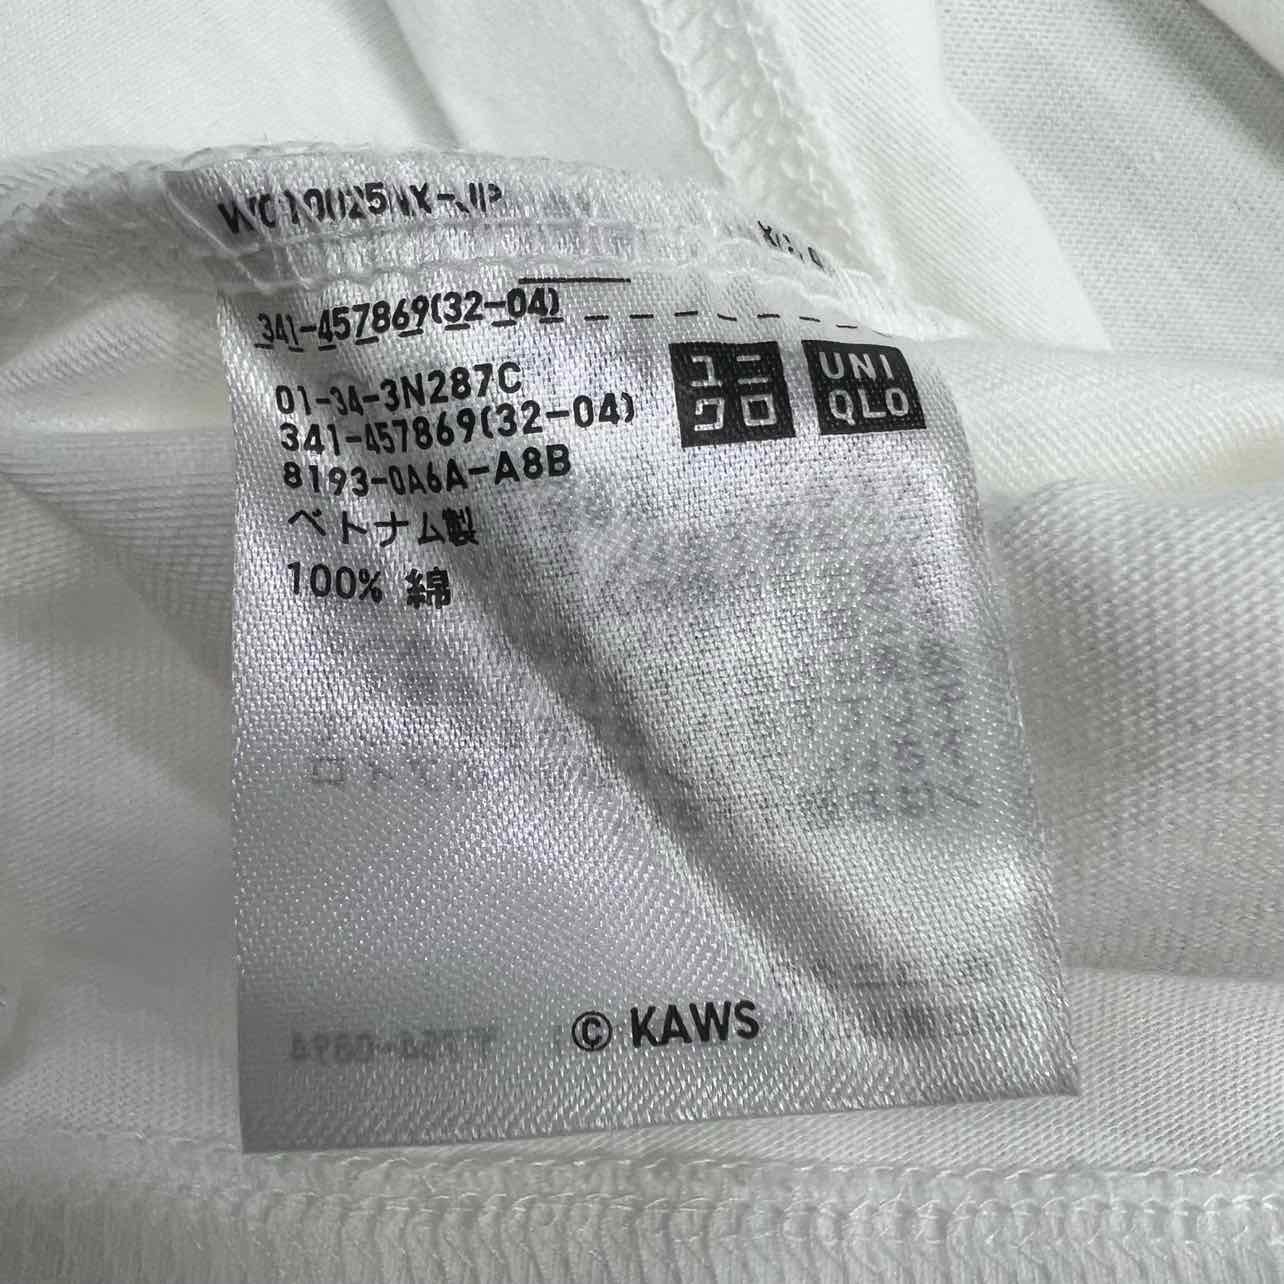 Uniqlo T-Shirt &quot;KAWS PEACE FOR ALL&quot; White New Size L